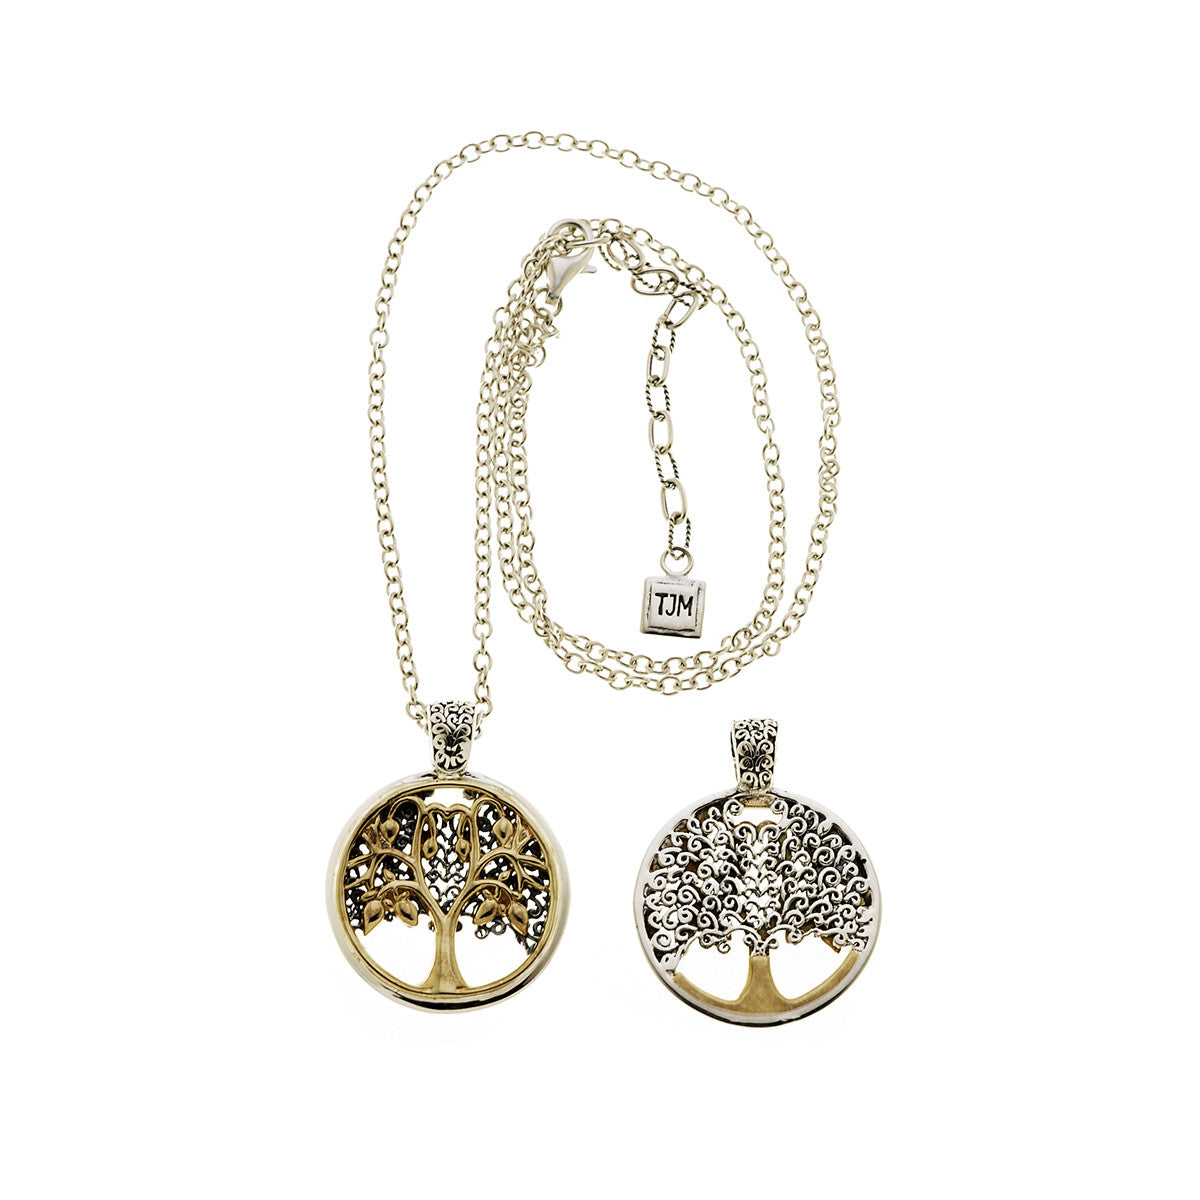 Tree Of Life Sterling Silver Bronze Pearl Reversible Necklace - Cynthia Gale New York Jewelry